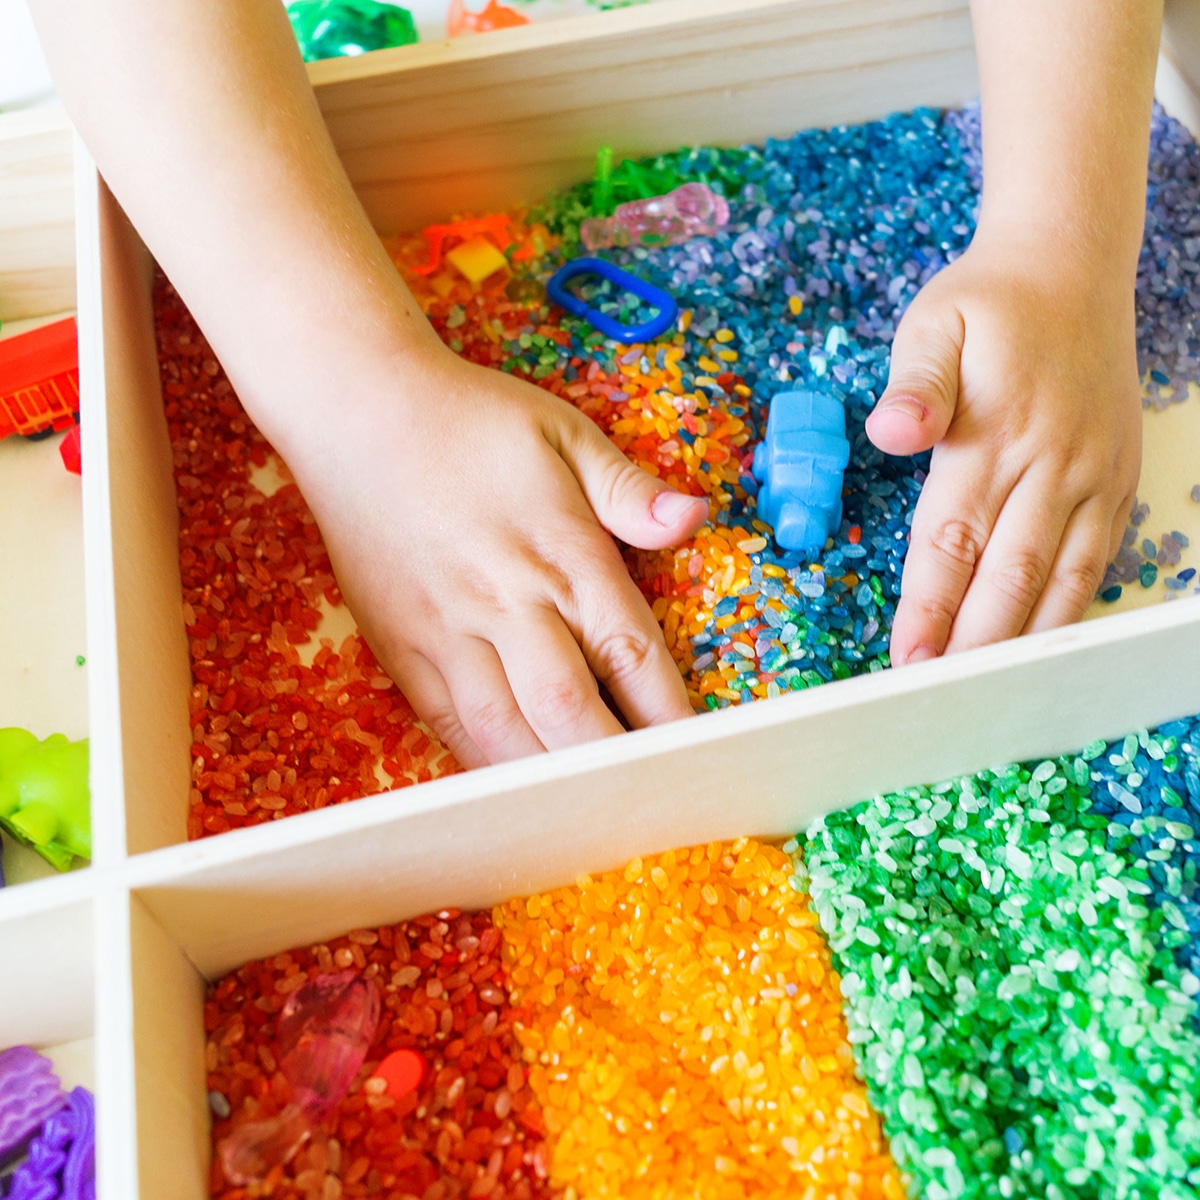 Stimulate Their Senses With Daily Sensory Play Activities